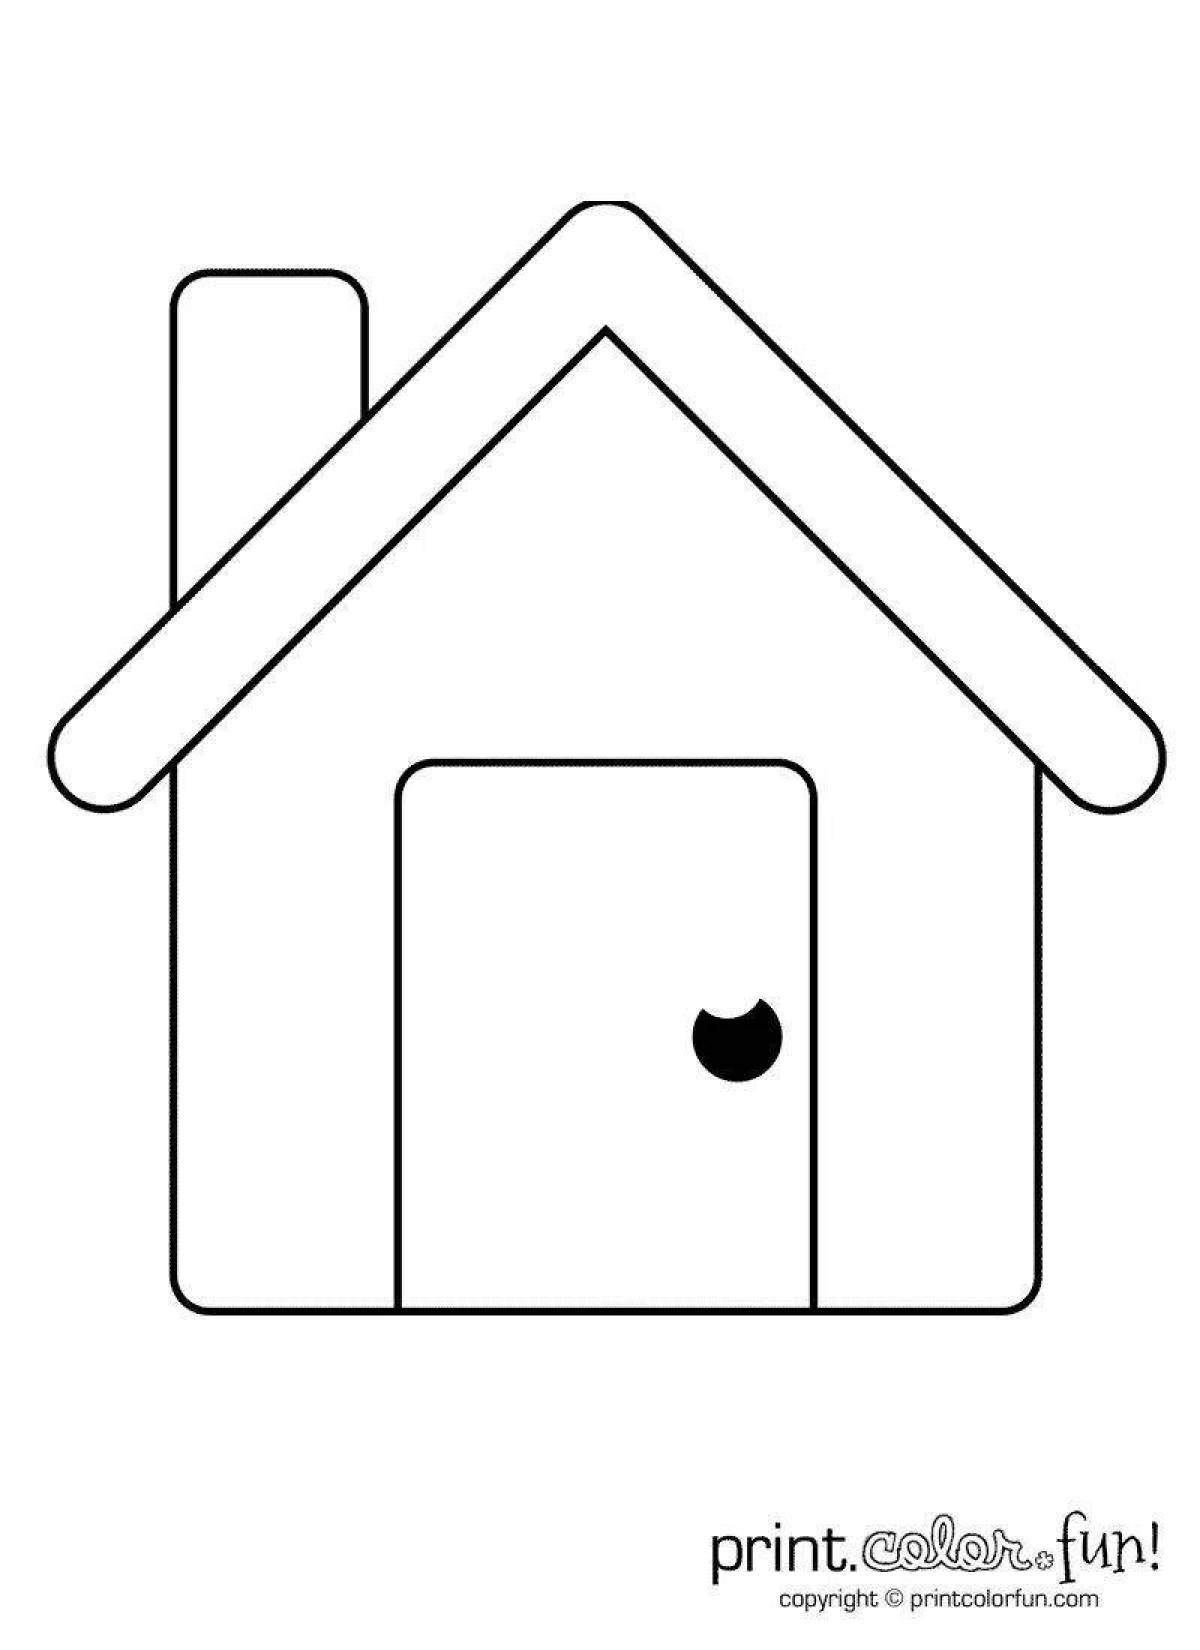 Coloring page wonderful house